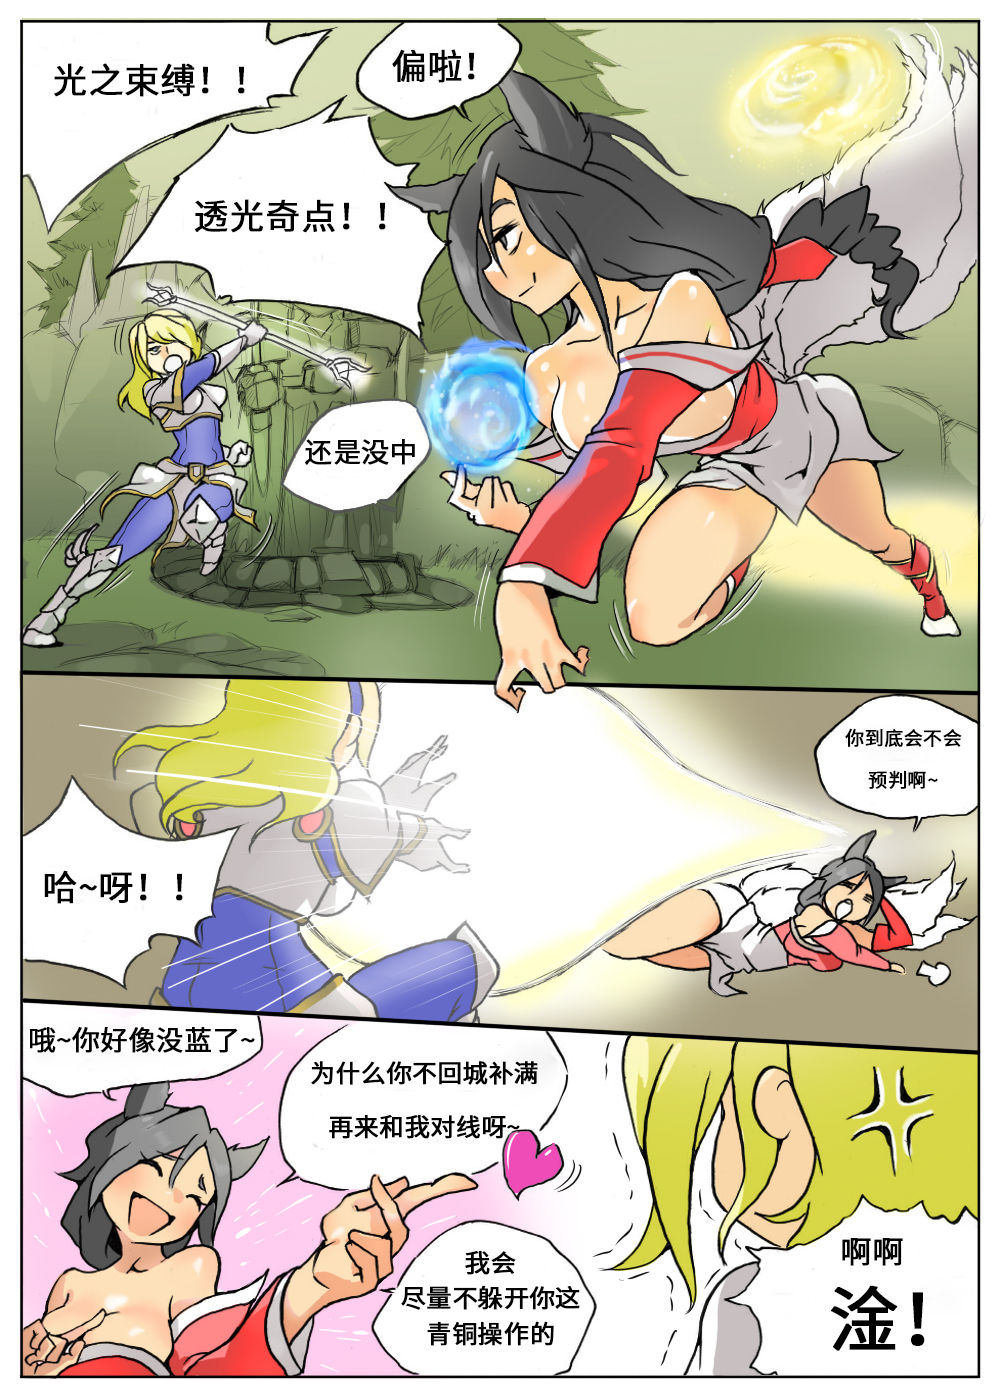 [KimMundo] Lux Gets Ganked! (League of Legends) [Chinese] [沒有漢化] 